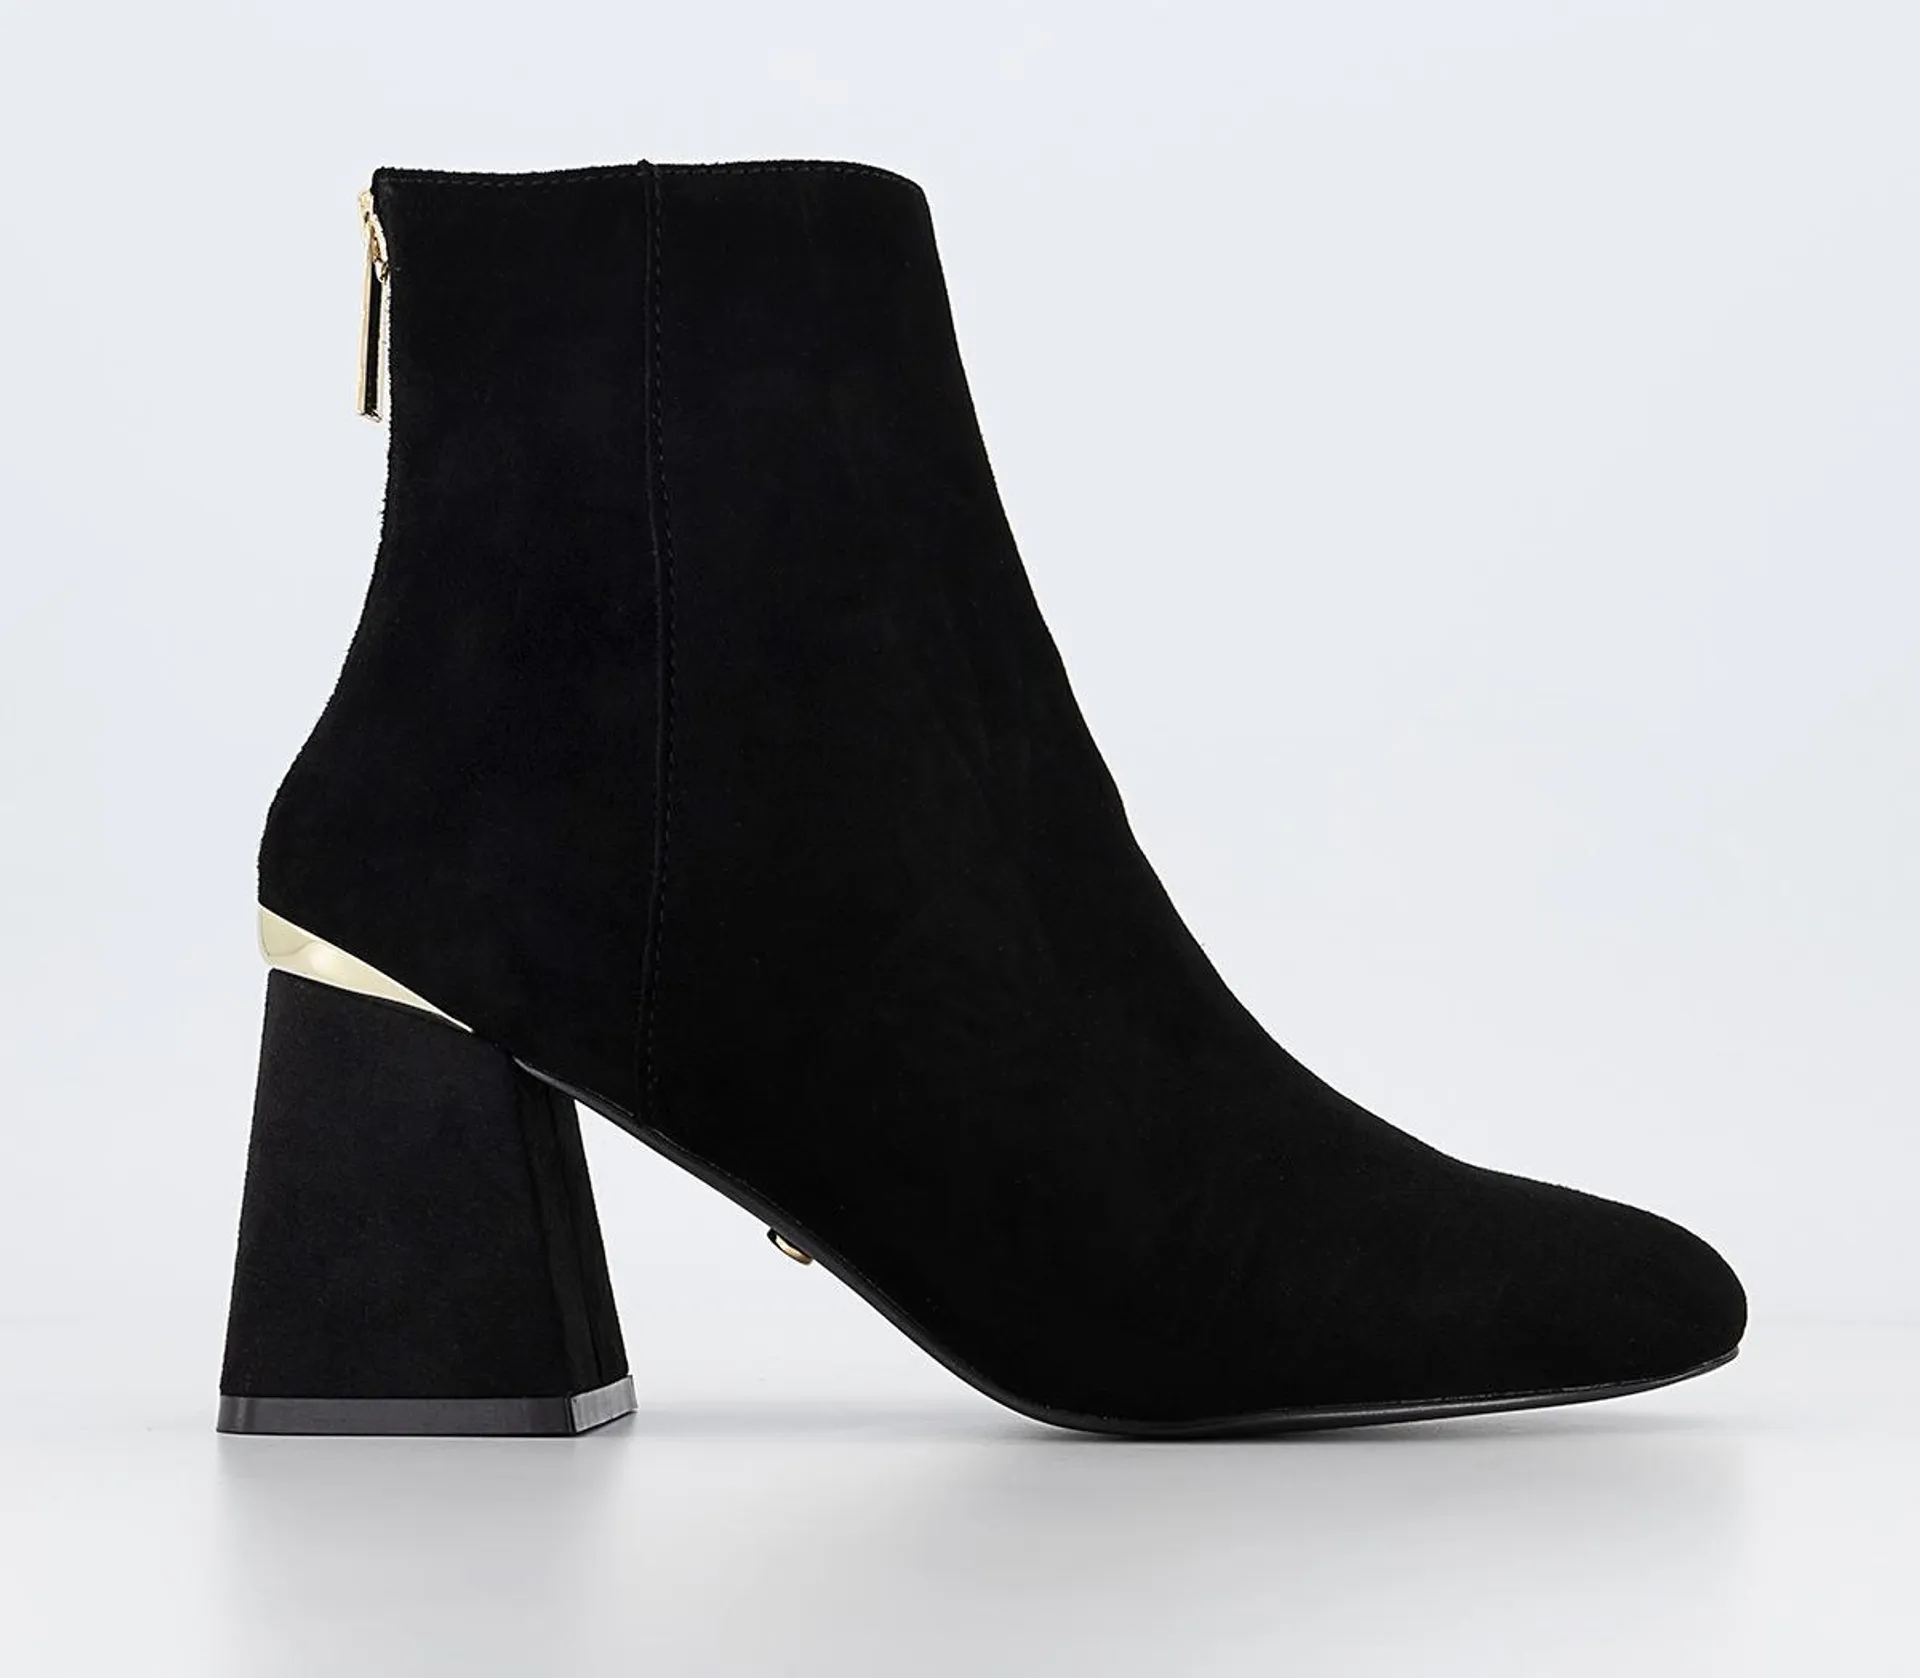 Atiana Gold Detail Black Heel Ankle Boots